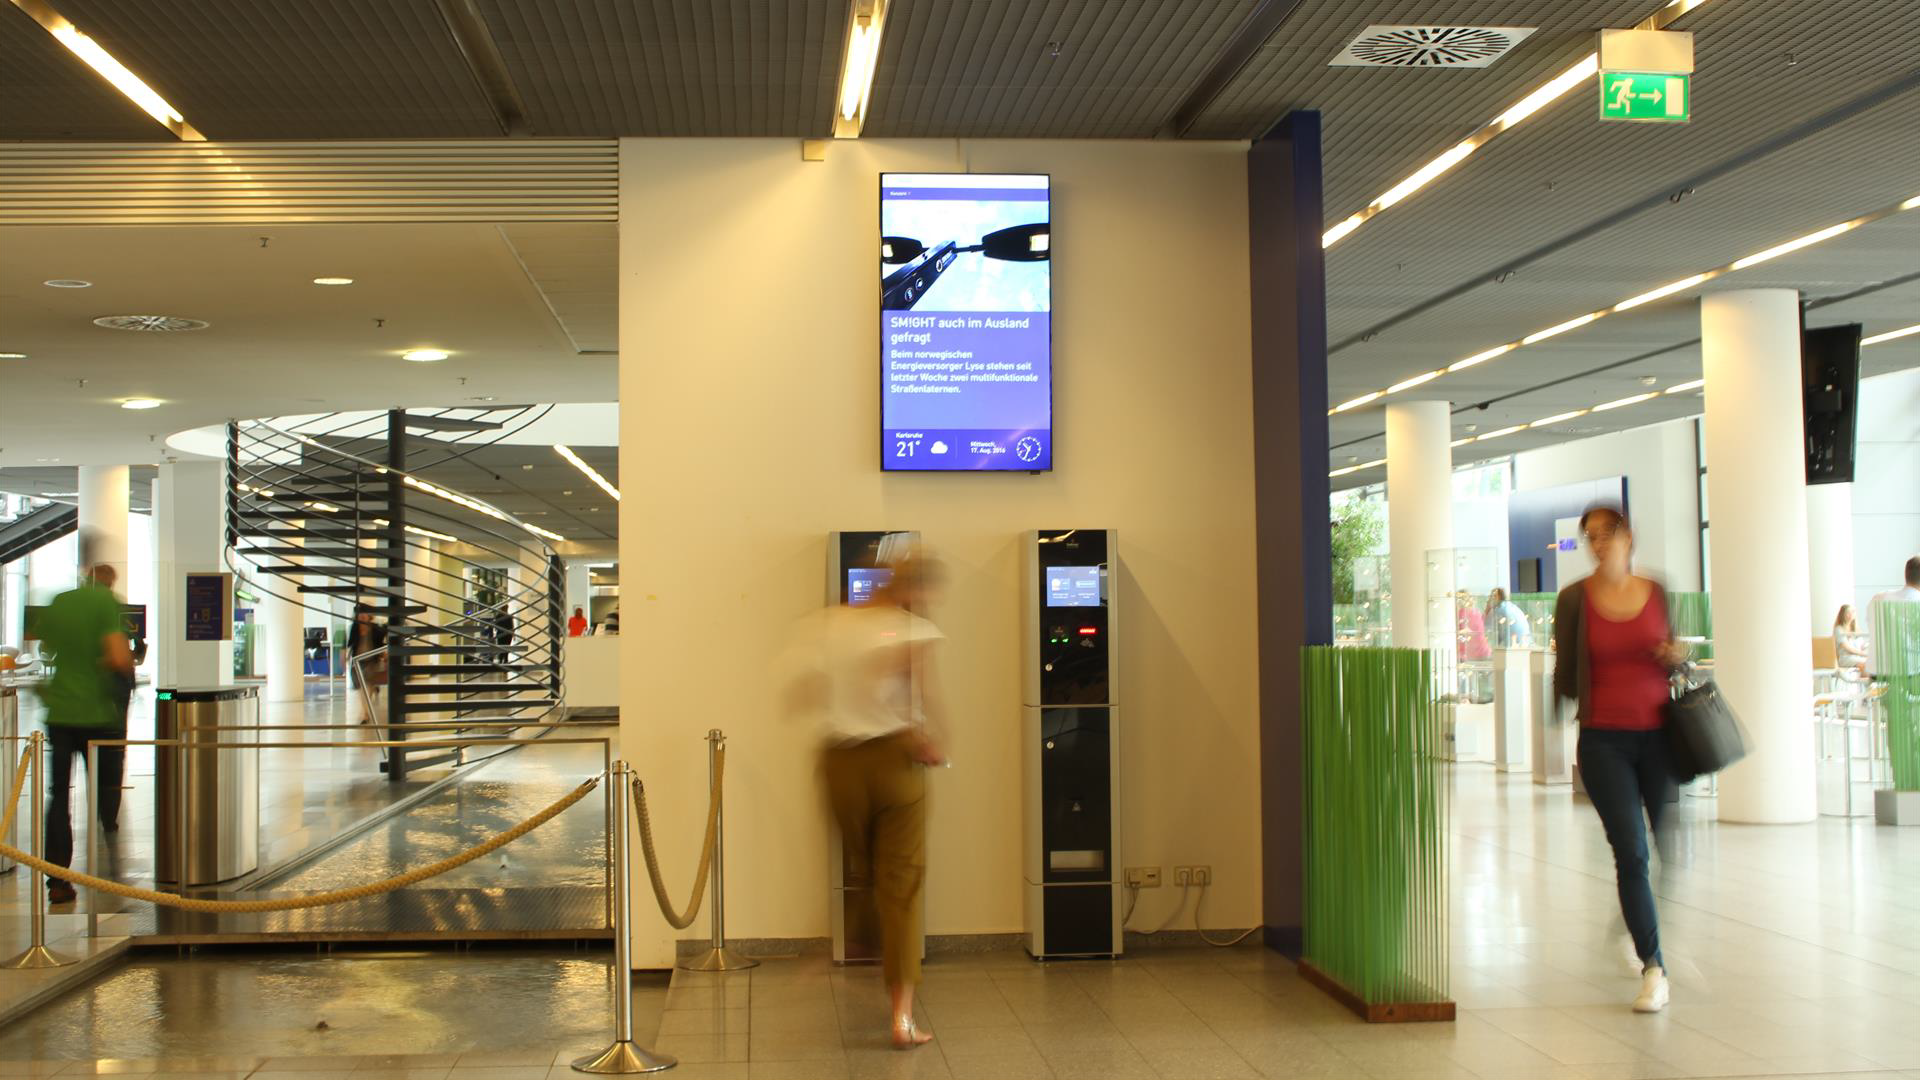 Example of digital signage from EnBW